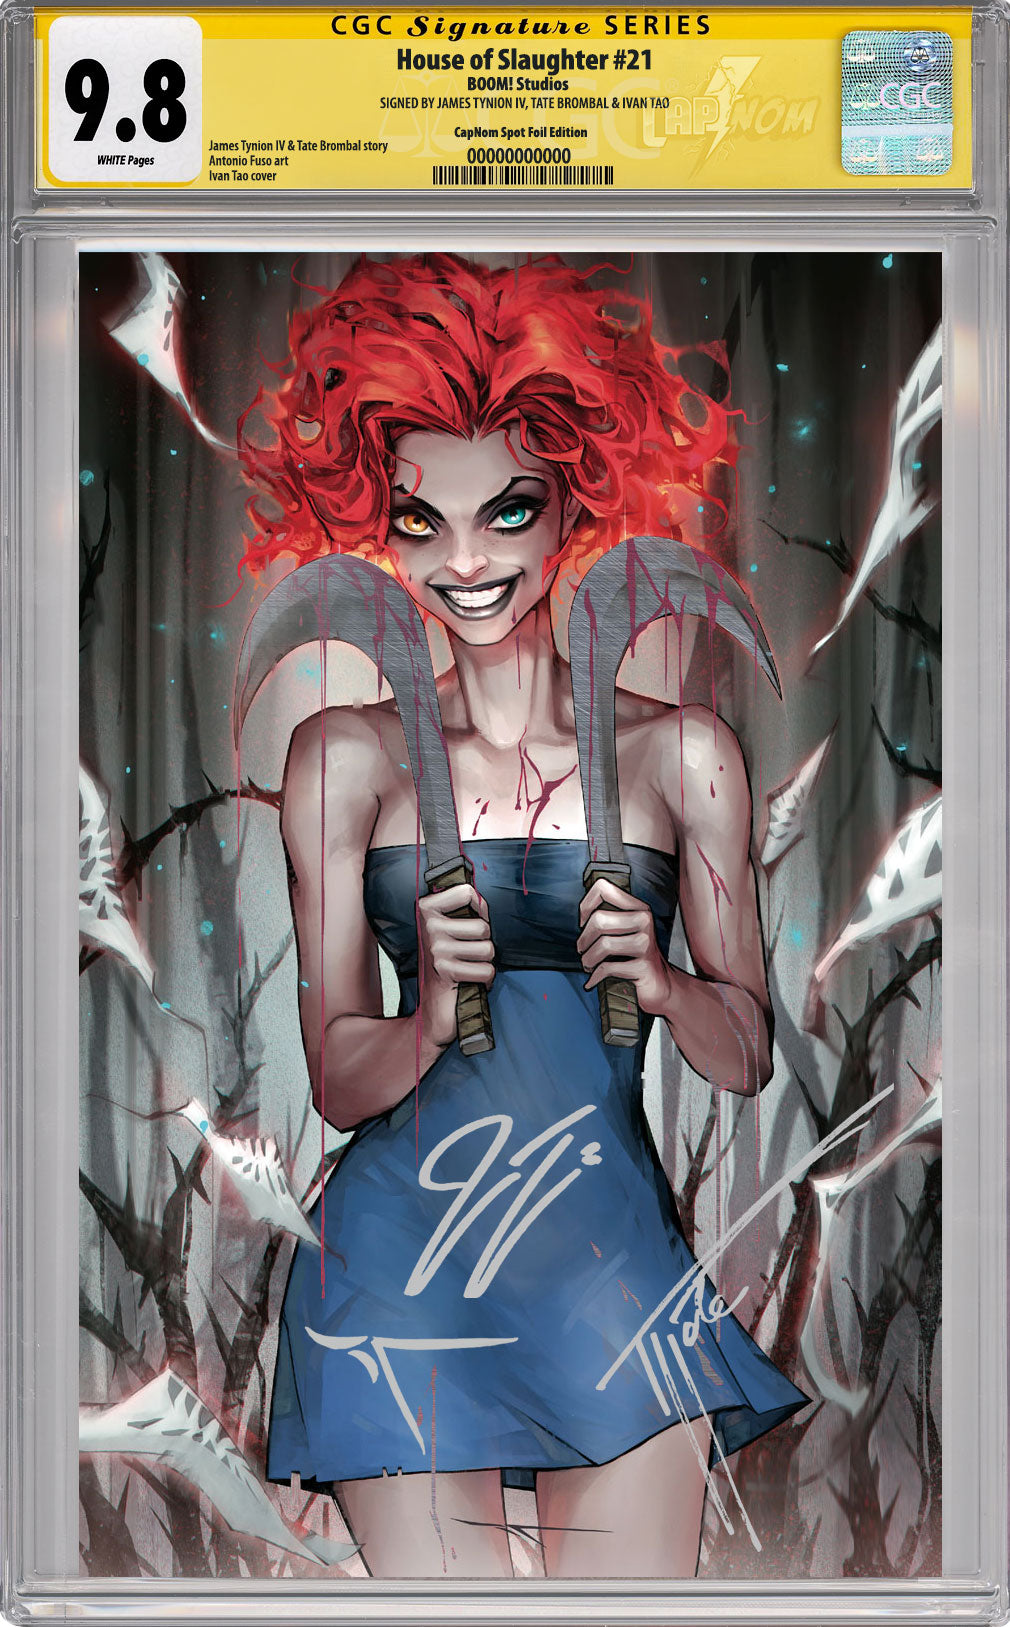 HOUSE OF SLAUGHTER #21 C2E2 Exclusive Virgin Spot UV Cover CGC SS 9.8 SIGNED BY IVAN TAO, TYNION & TATE BROMBAL